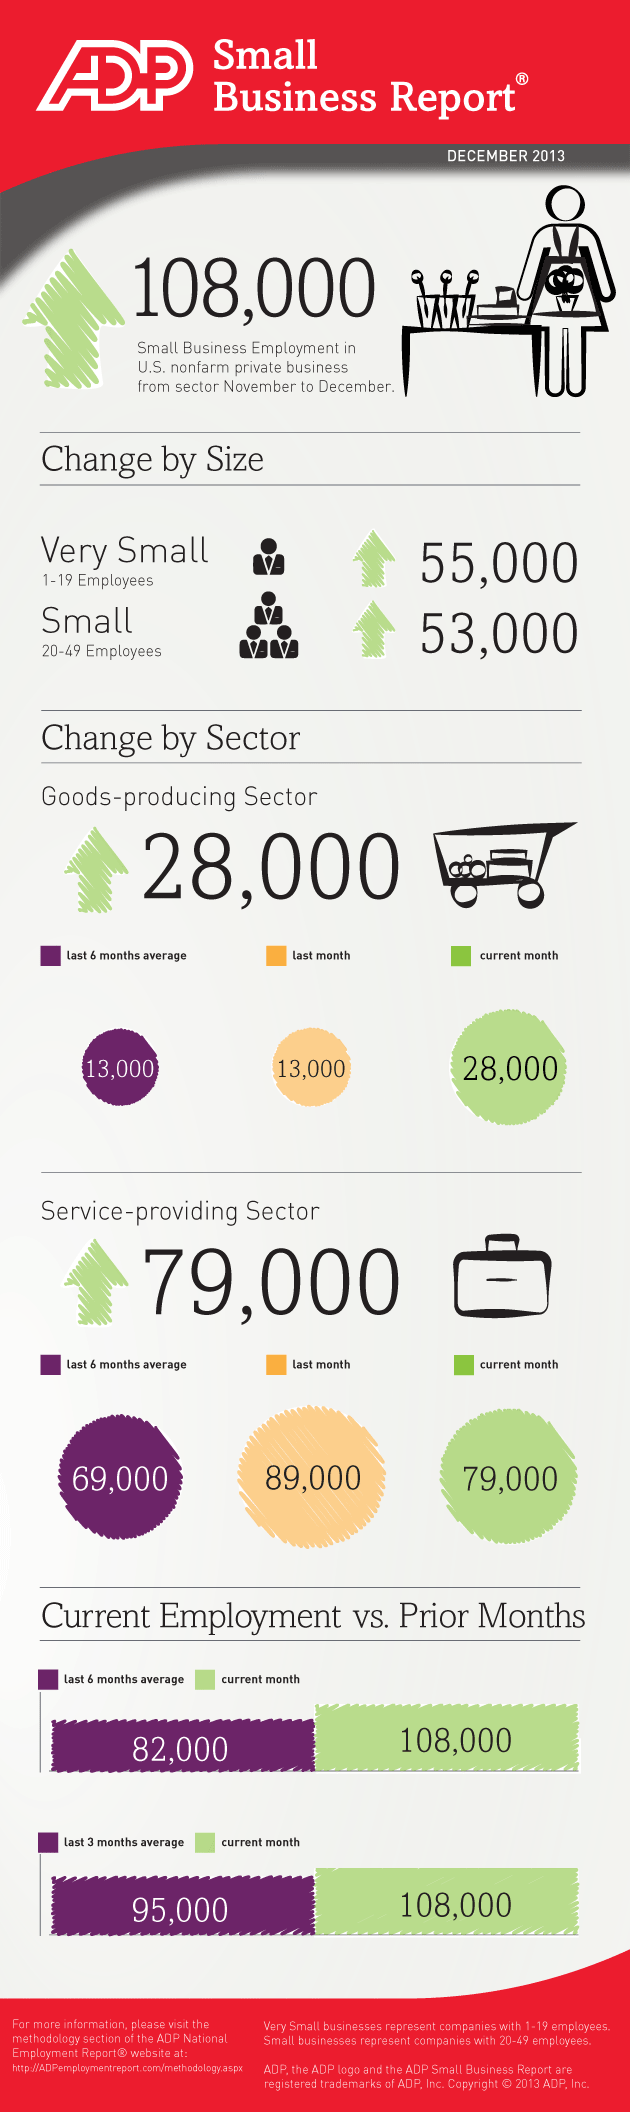 Small Businesses Created 108,000 Jobs in December Infographic